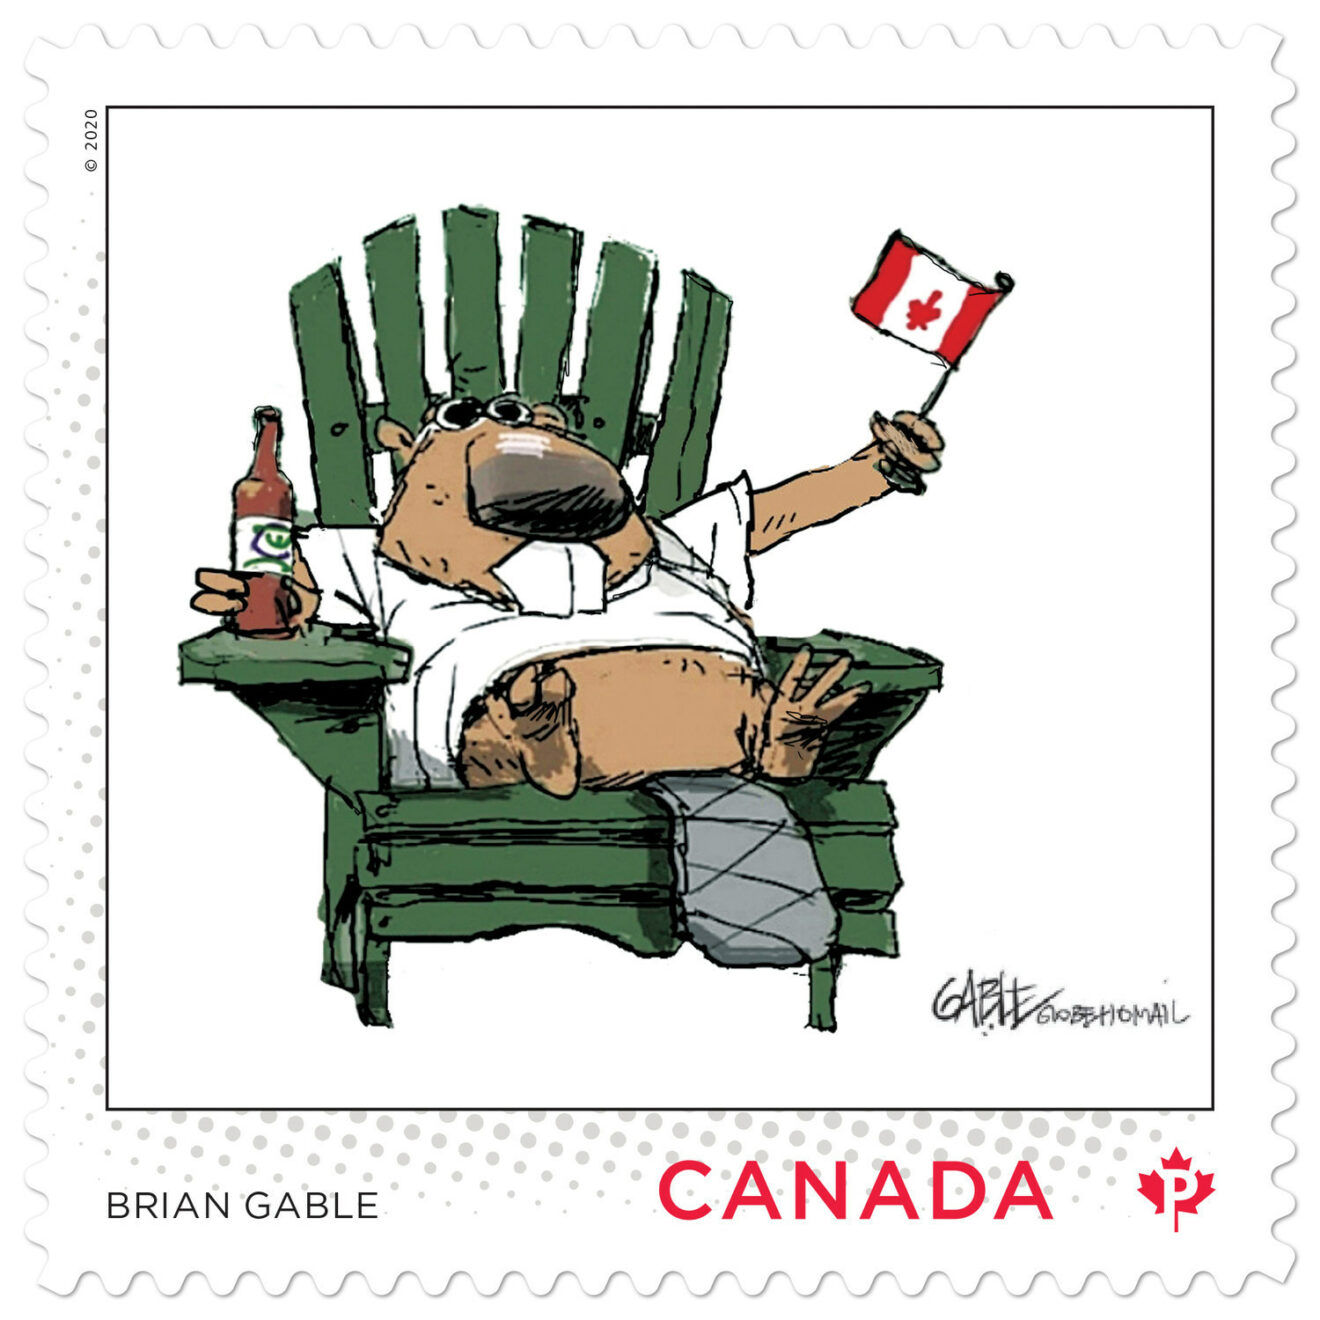 Canada Post pays tribute to five legendary editorial cartoonists with a special stamp